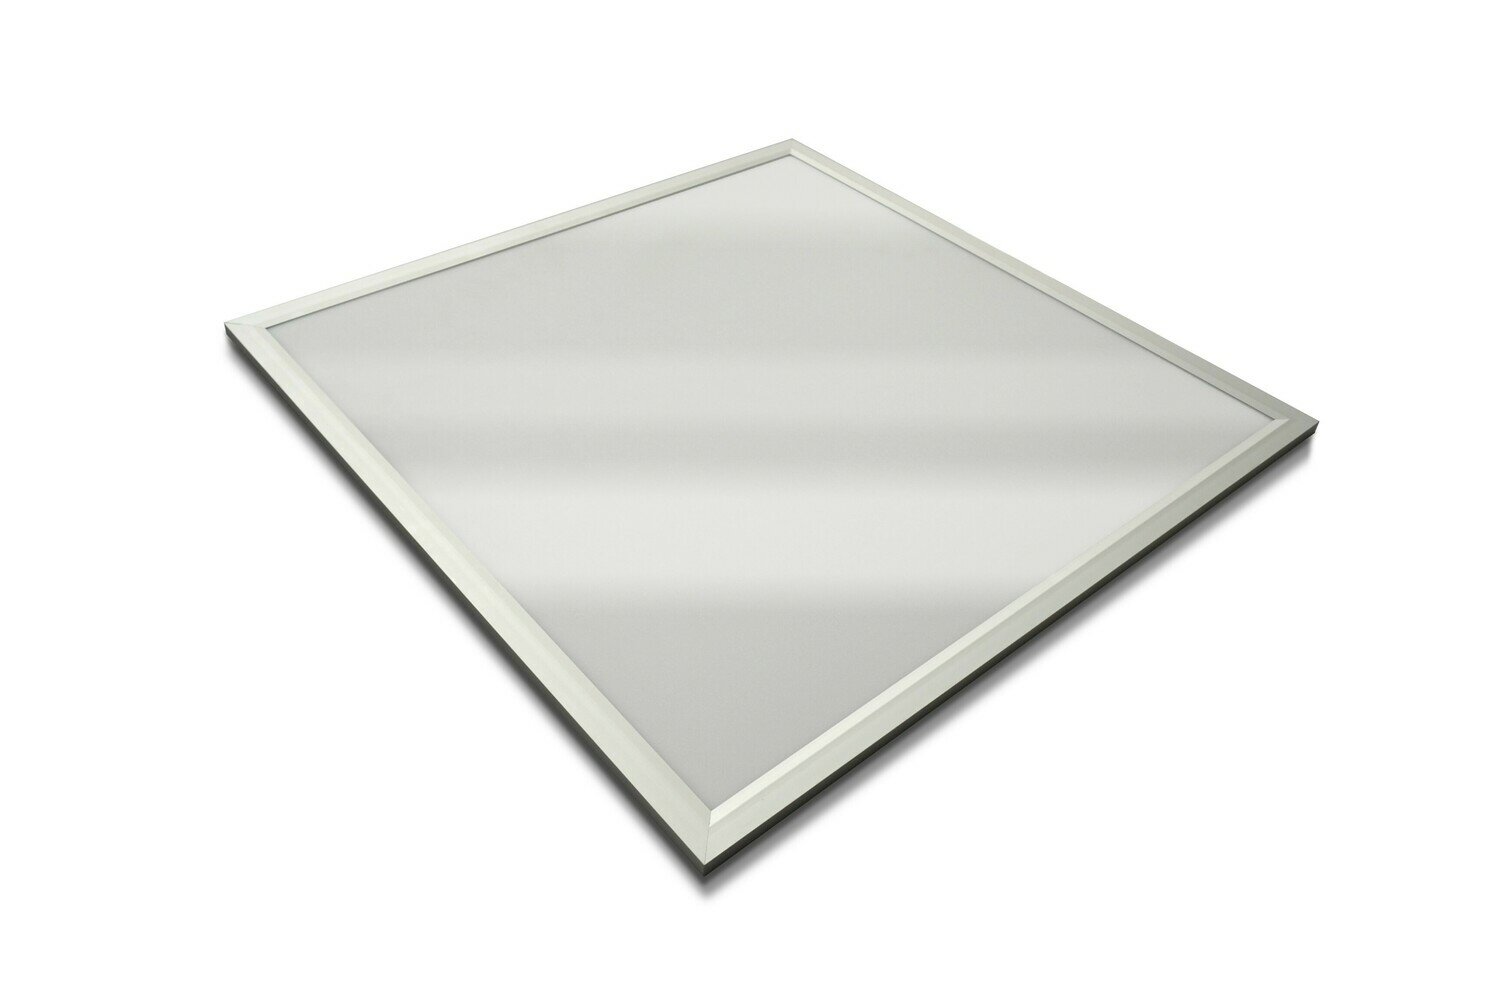 ProLuce® LED Panel PIAZZA SP 595x595x10 mm 36W, 2700K, 3240 lm, 110°, IP20, weiss, 0-10V dimmbar